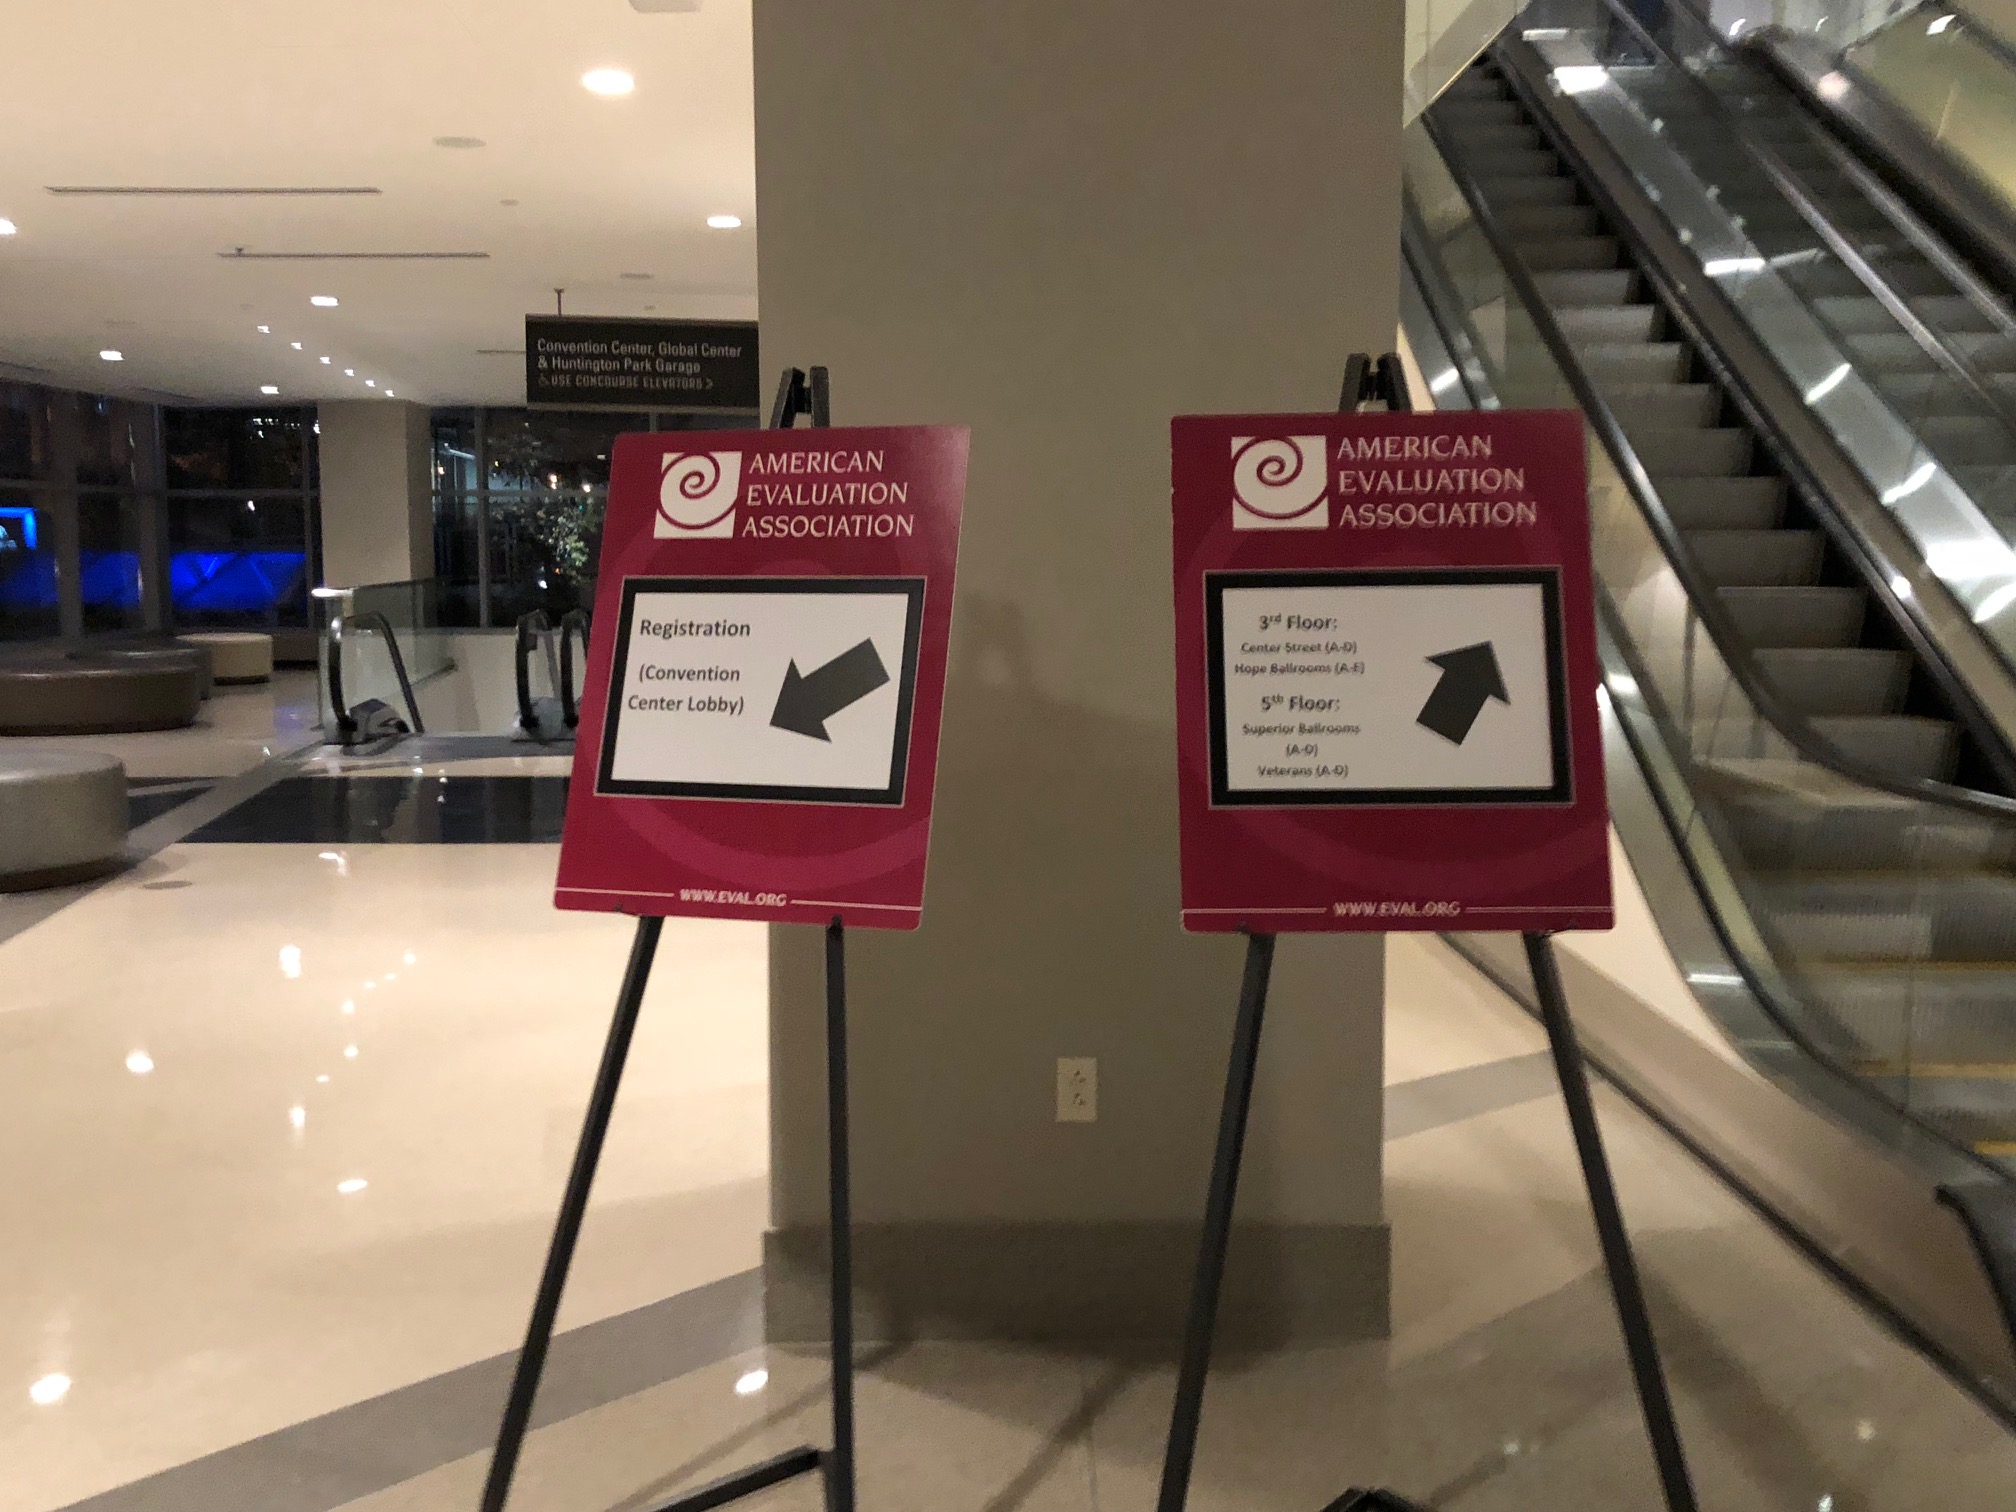 Directional signs at Evaluation 2018